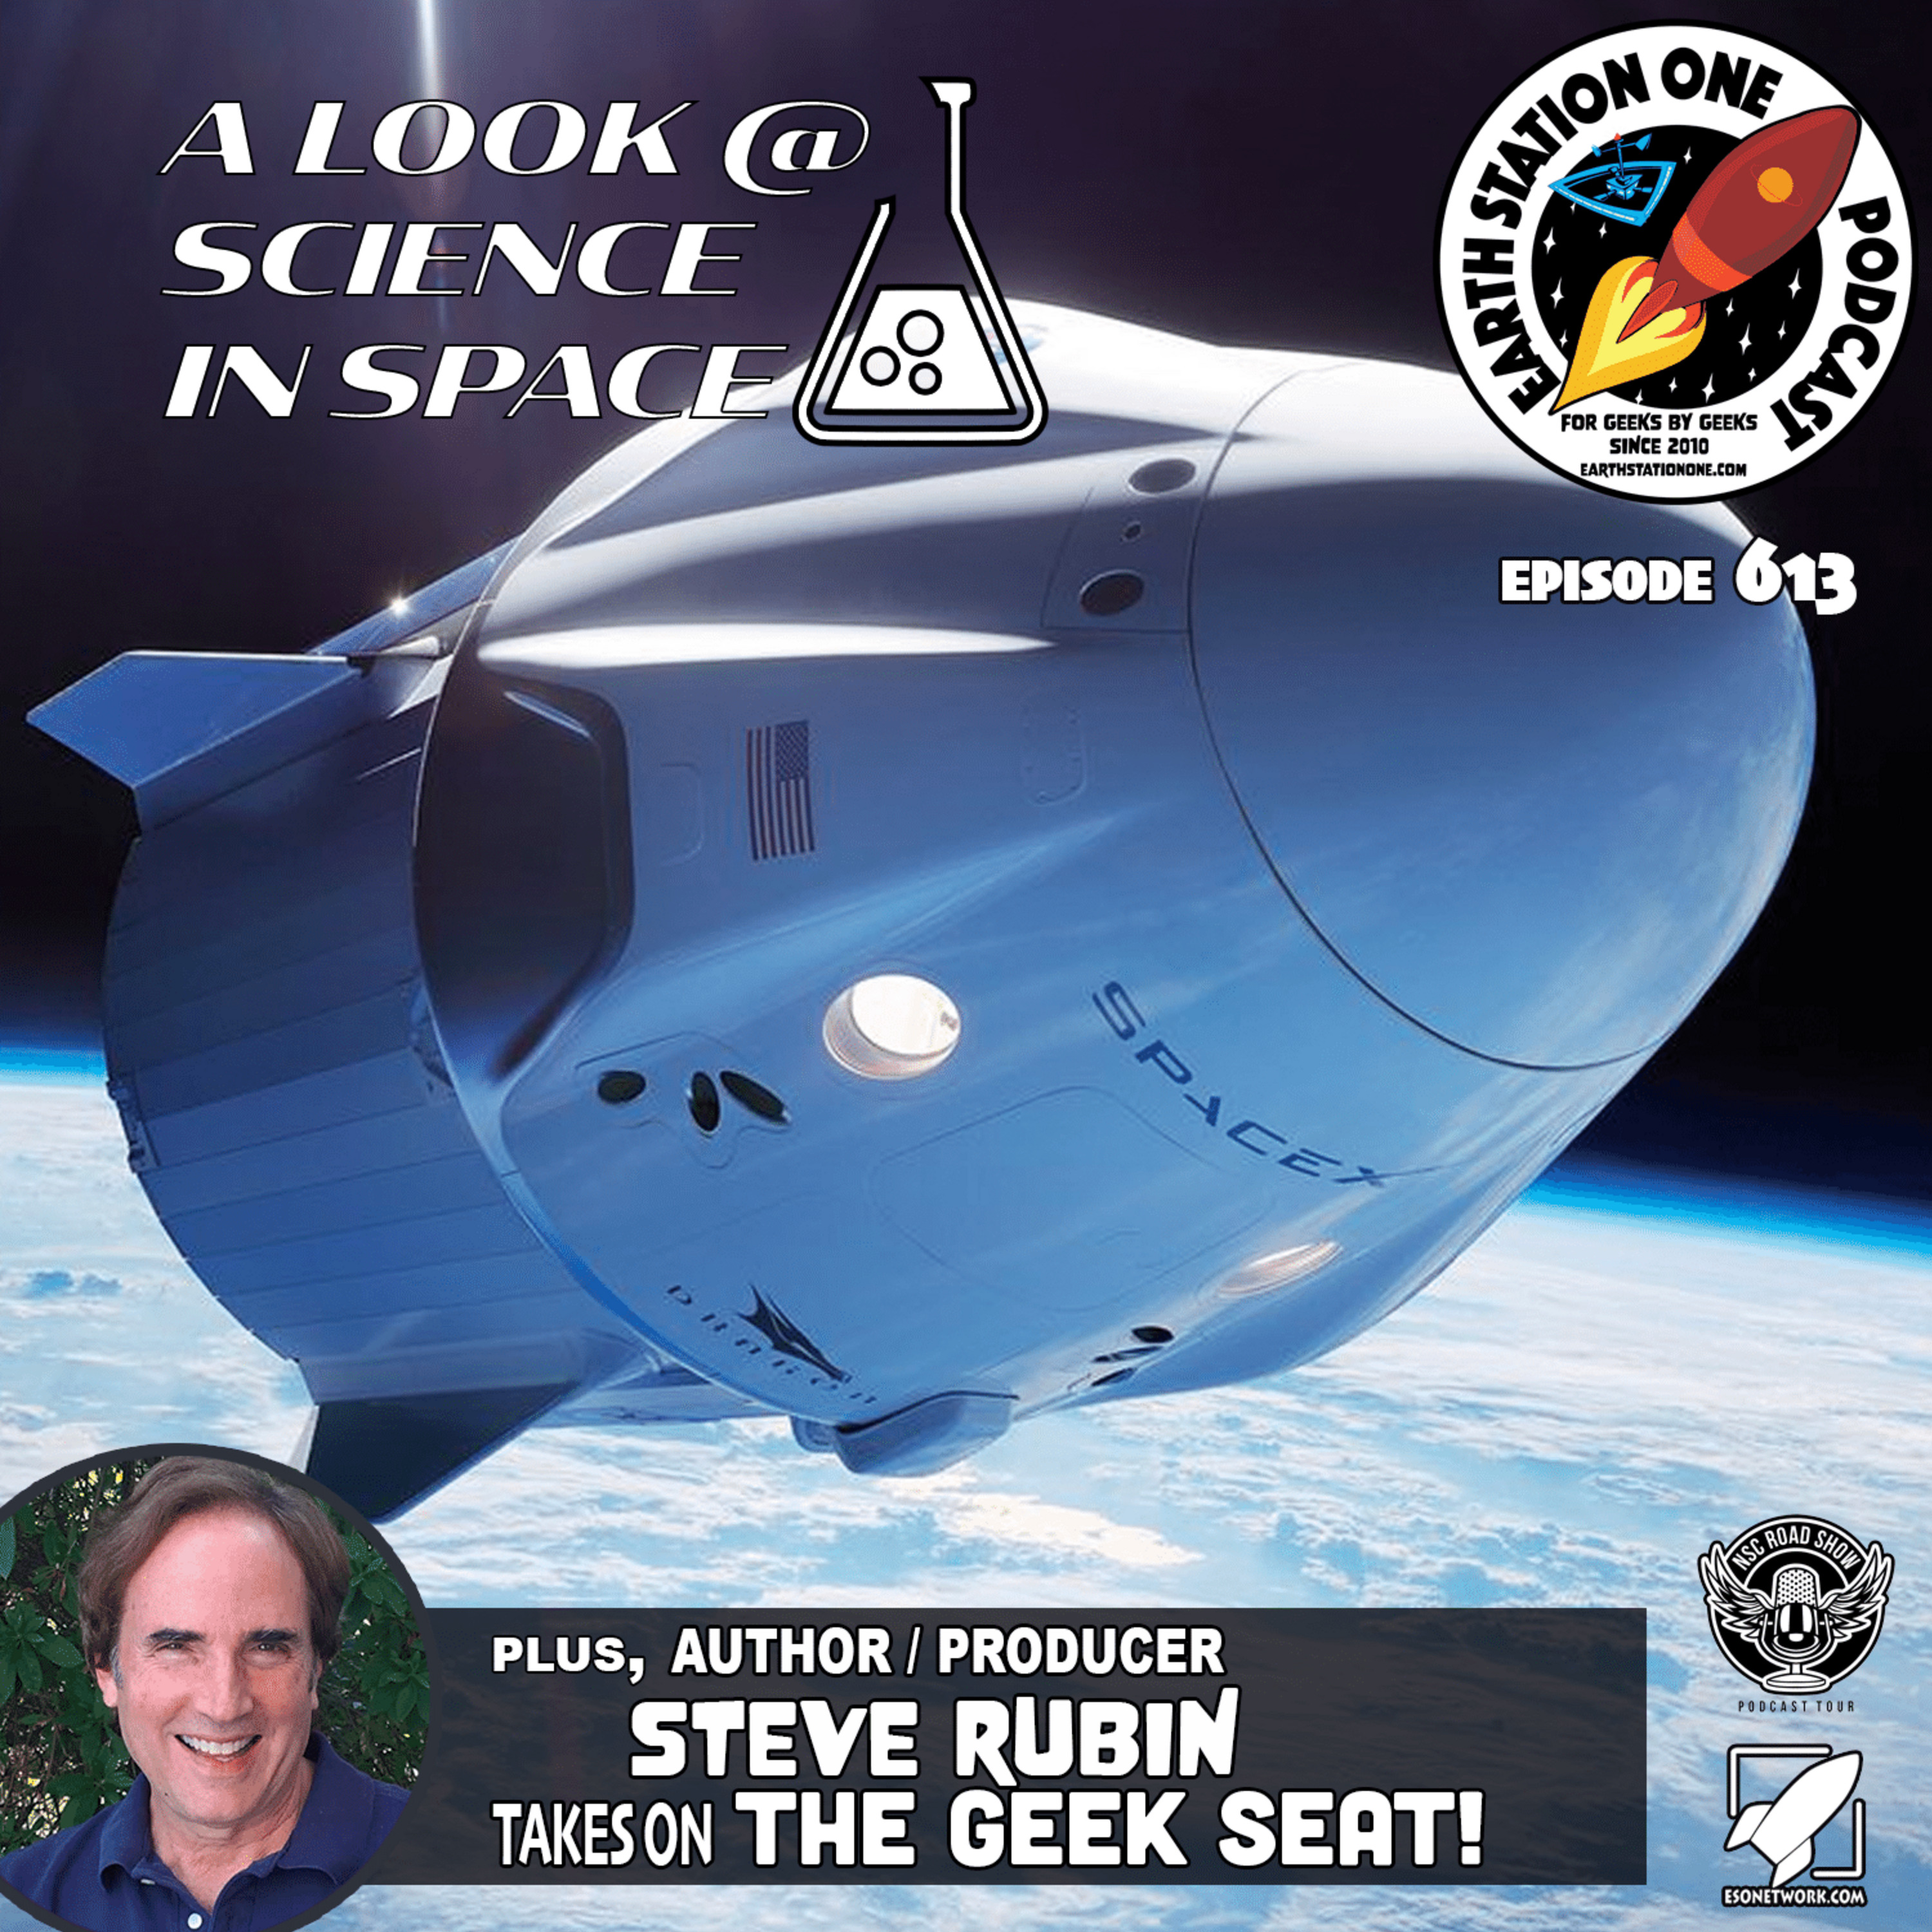 The Earth Station One Podcast - A Look @ Science: Is 2022 The Year Space Flight Takes Off?